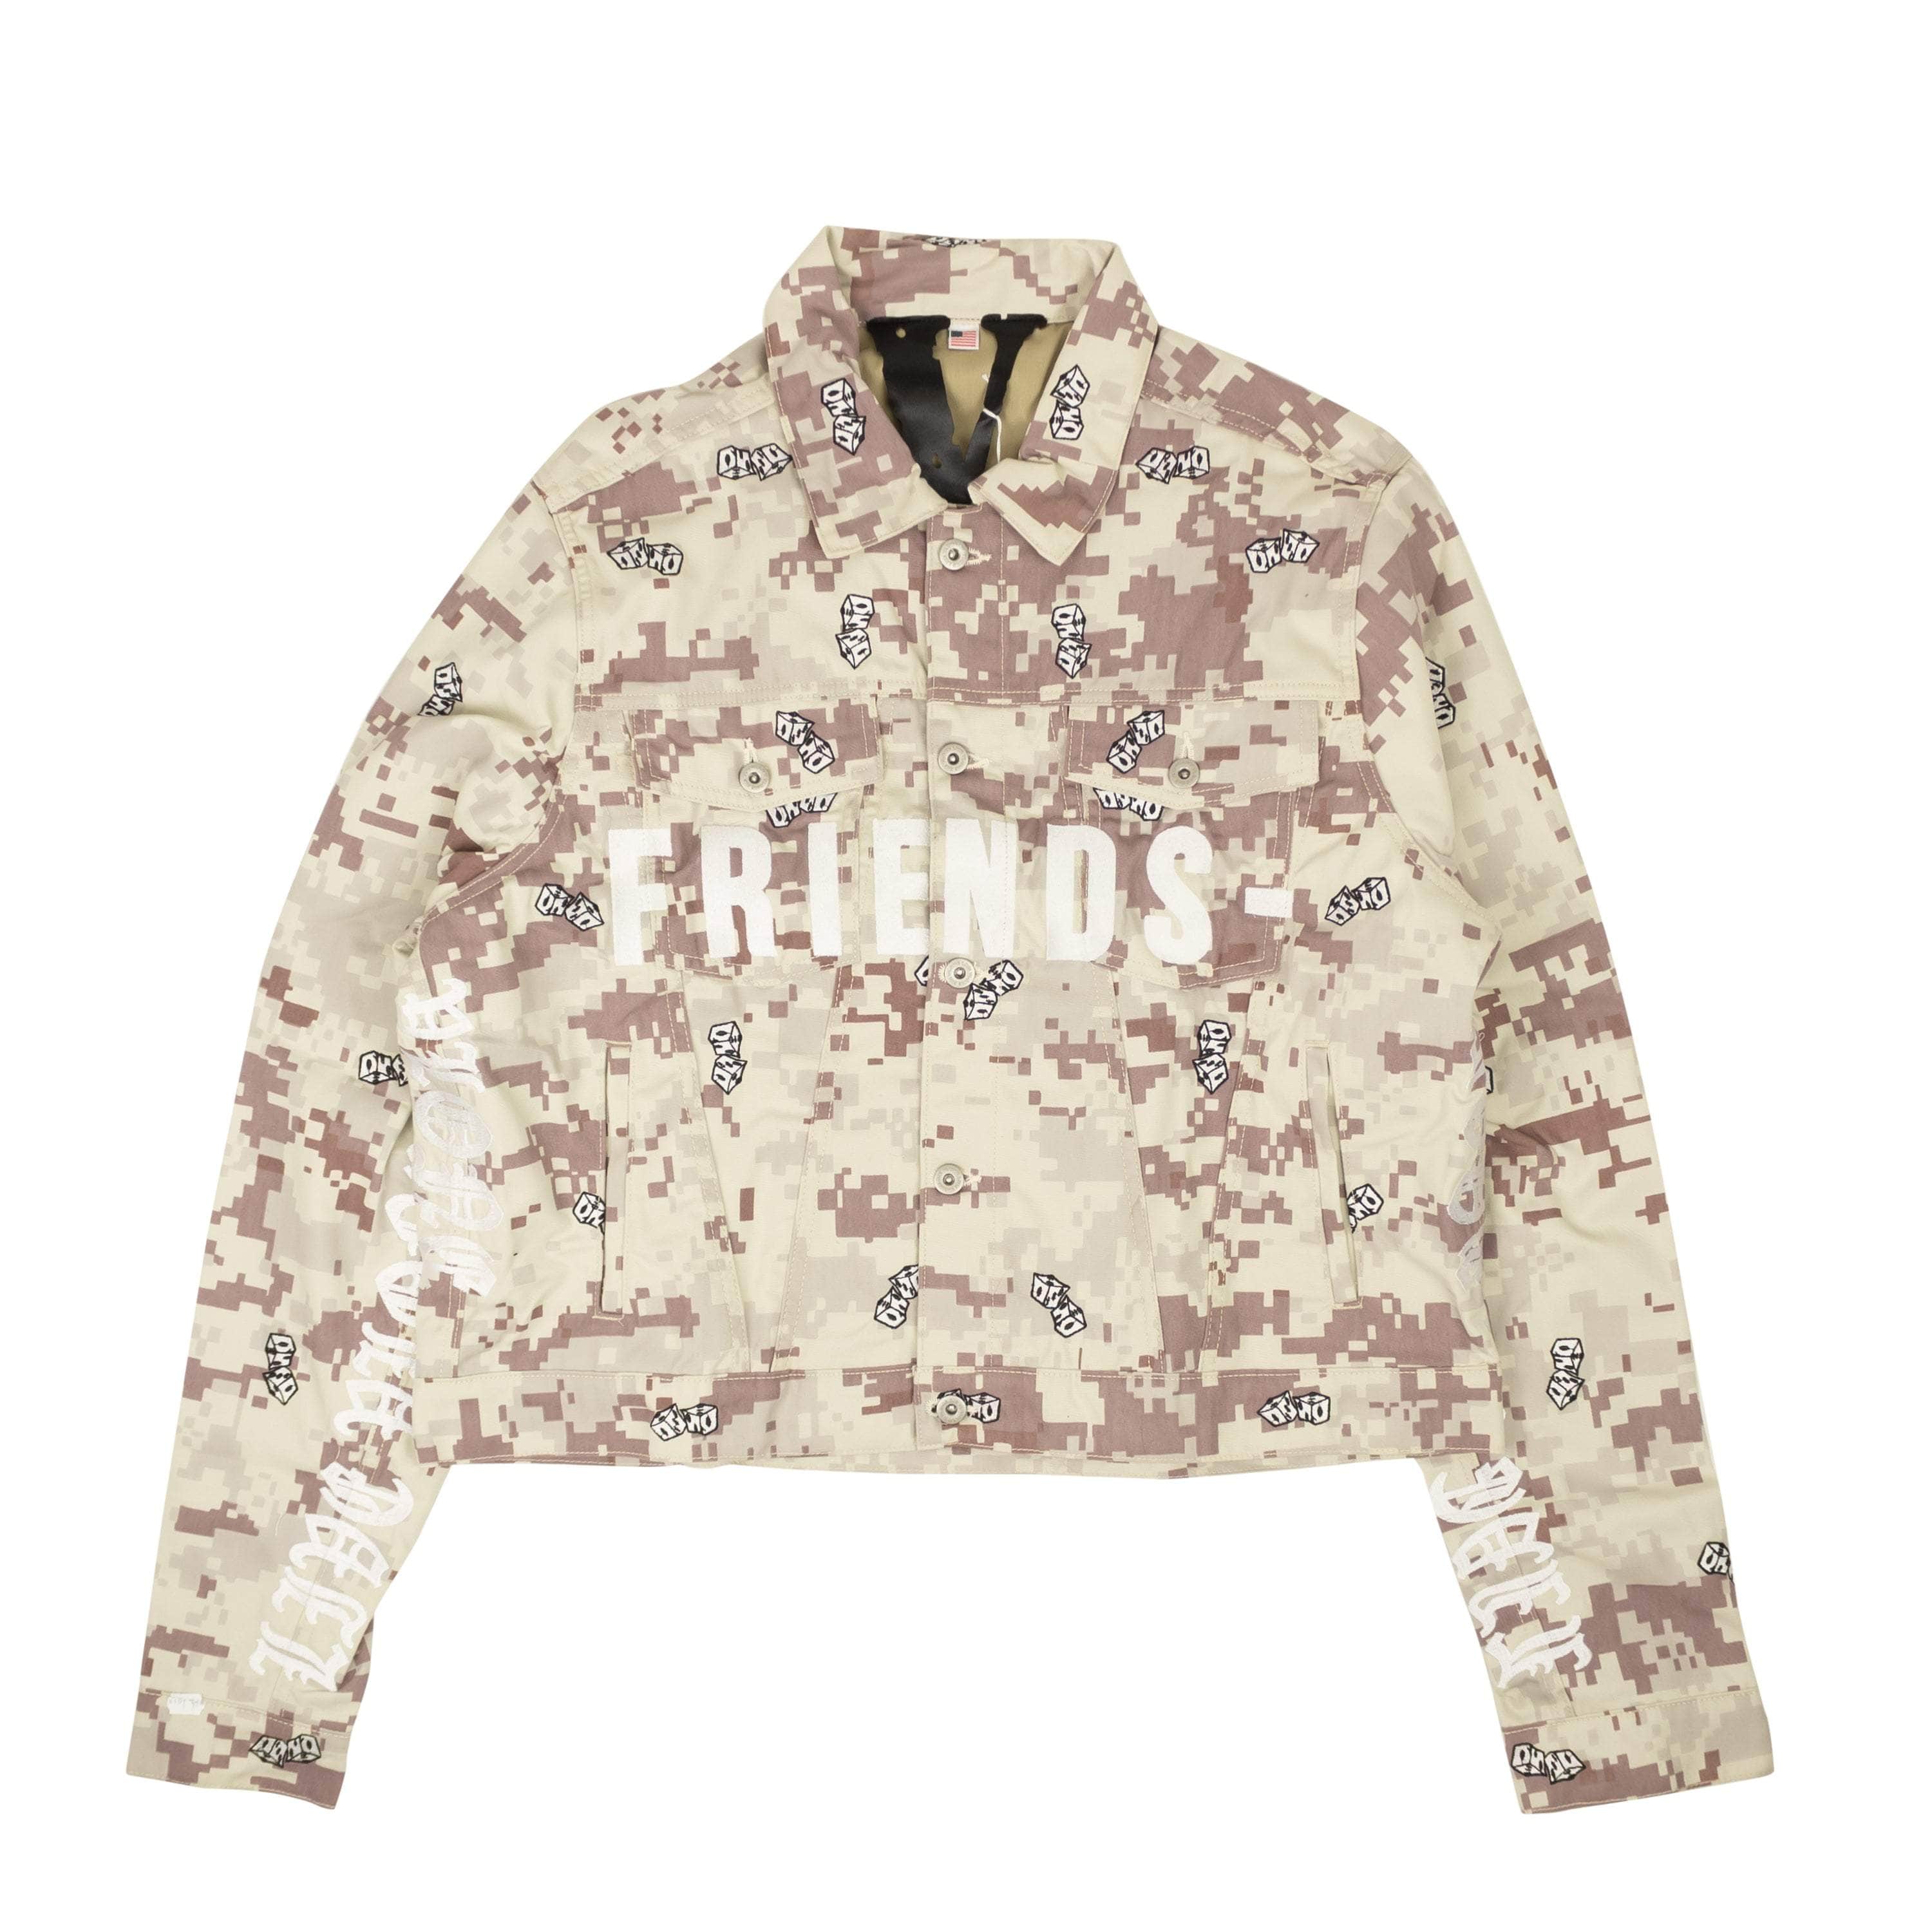 Vlone 750-1000, channelenable-all, chicmi, couponcollection, gender-mens, main-clothing, mens-denim-jackets, mens-shoes, size-xxl, vlone XXL Beige Digi Camo Denim Jacket VLN-XOTW-0002/XXL VLN-XOTW-0002/XXL